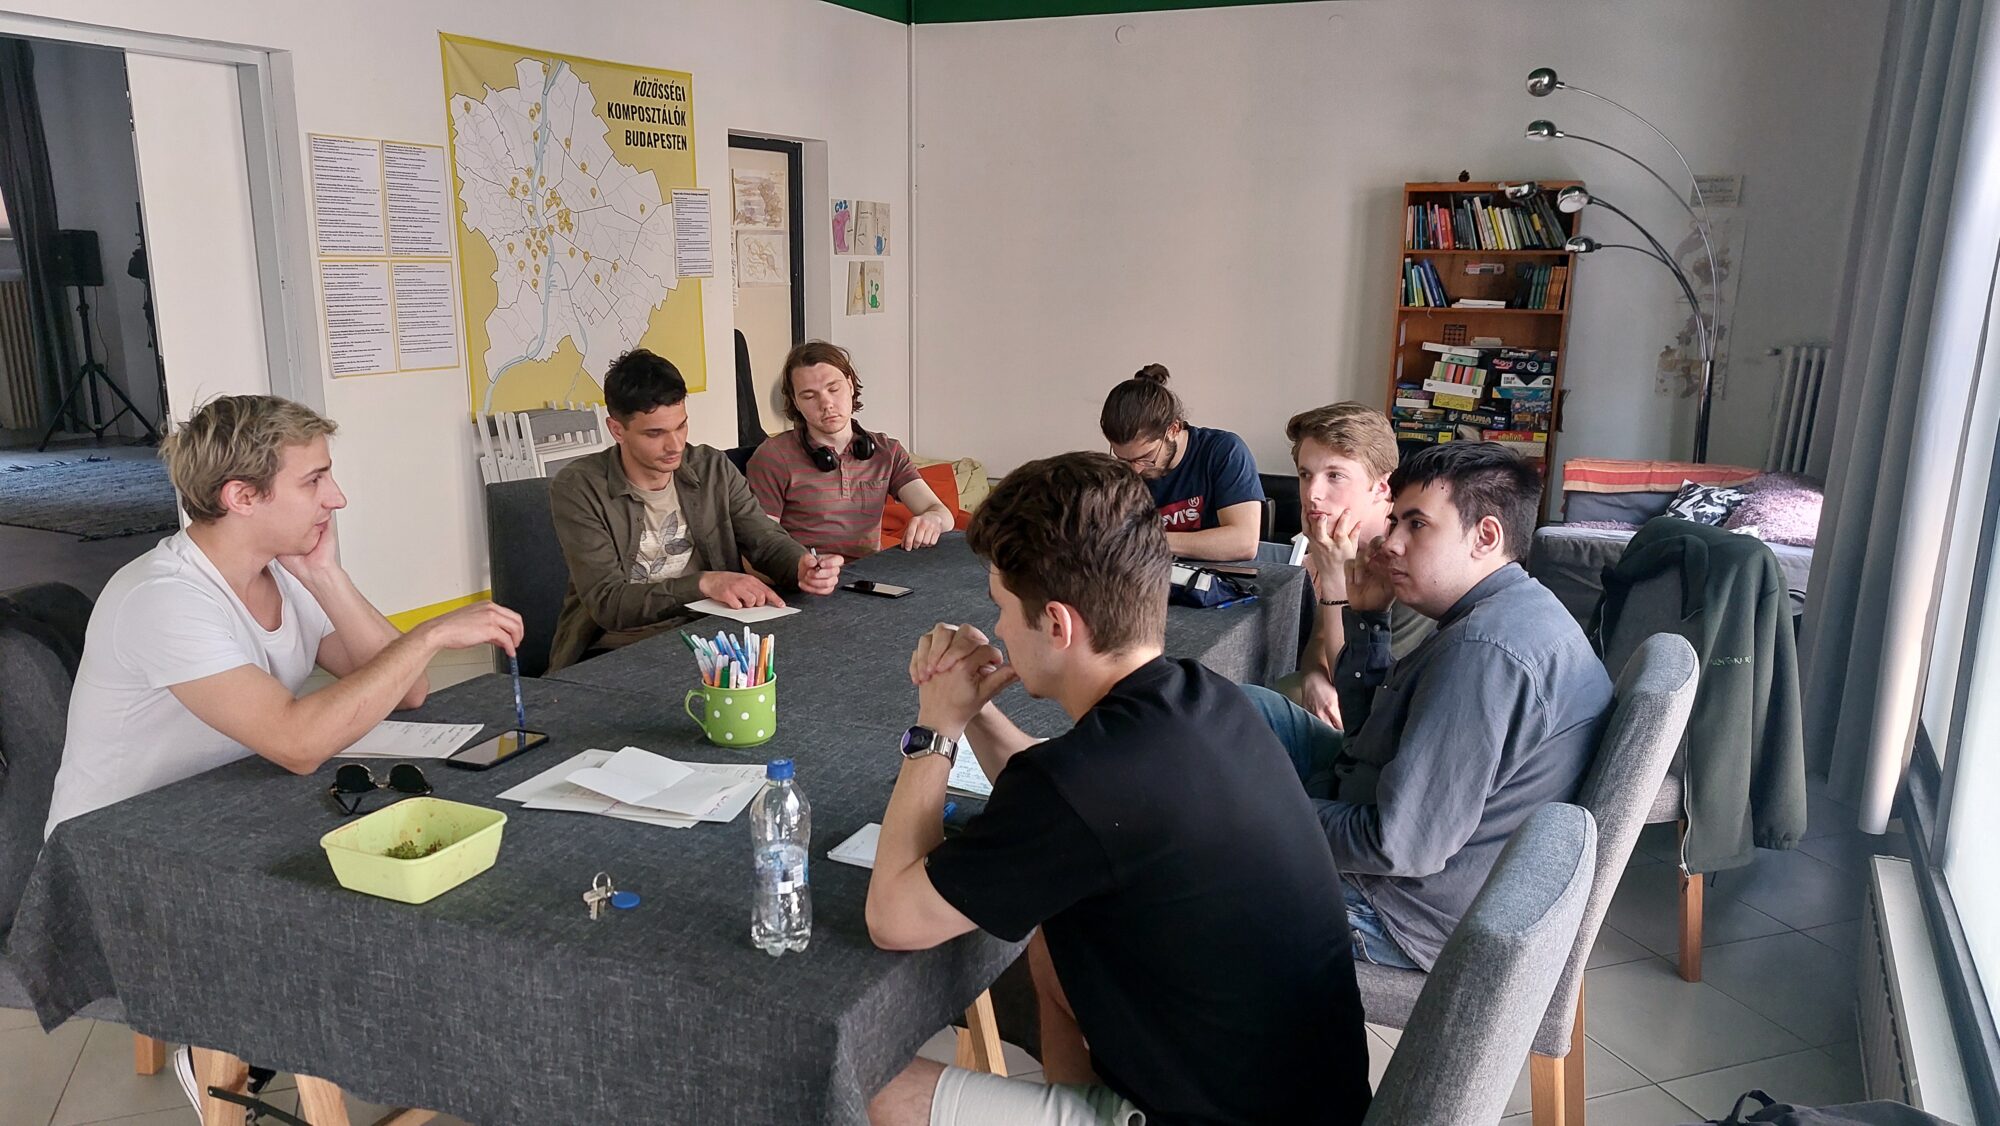 Bolygó – a Community Space for Youth in Hungary